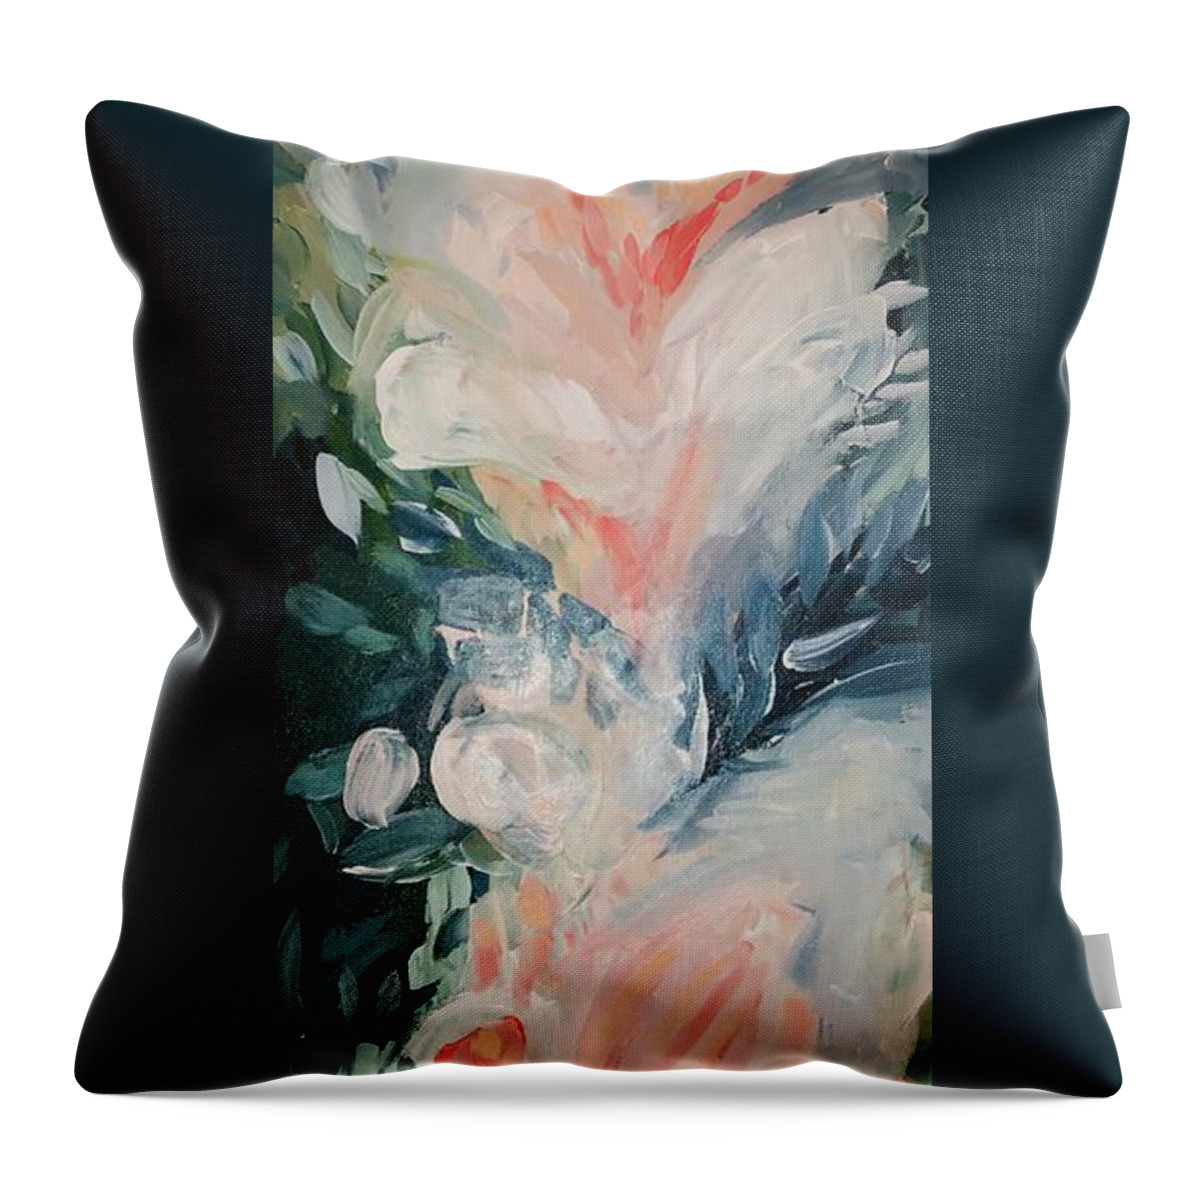 Blooms Flowers Wall Blooms Florals Foliage Pink Peonies Decor Throw Pillow featuring the painting Spring Blooms by Meredith Palmer